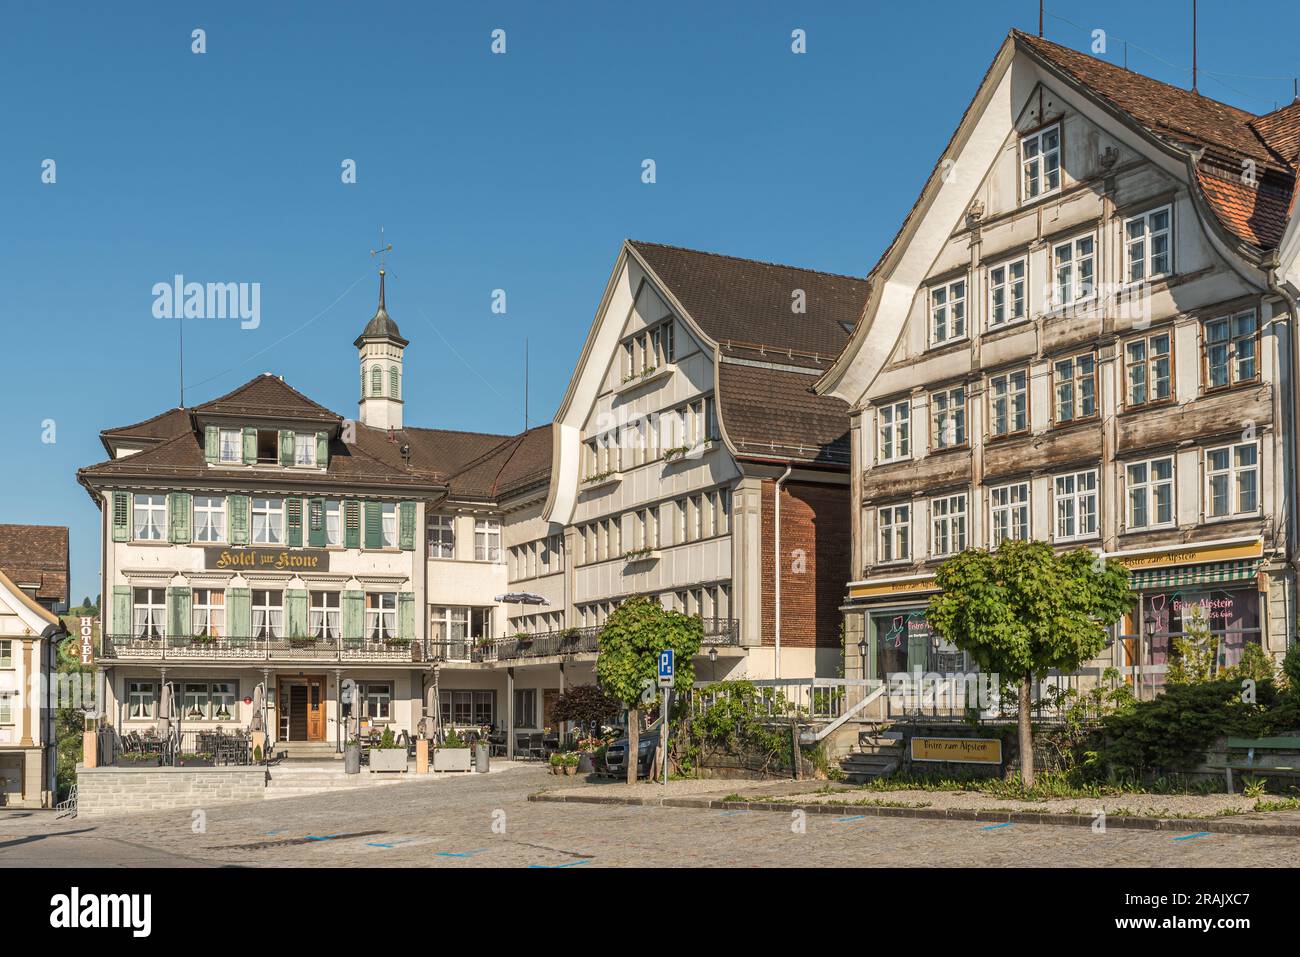 Village square with traditional Appenzell wooden houses with curved gables, Gais, Appenzell Ausserrhoden, Switzerland Stock Photo